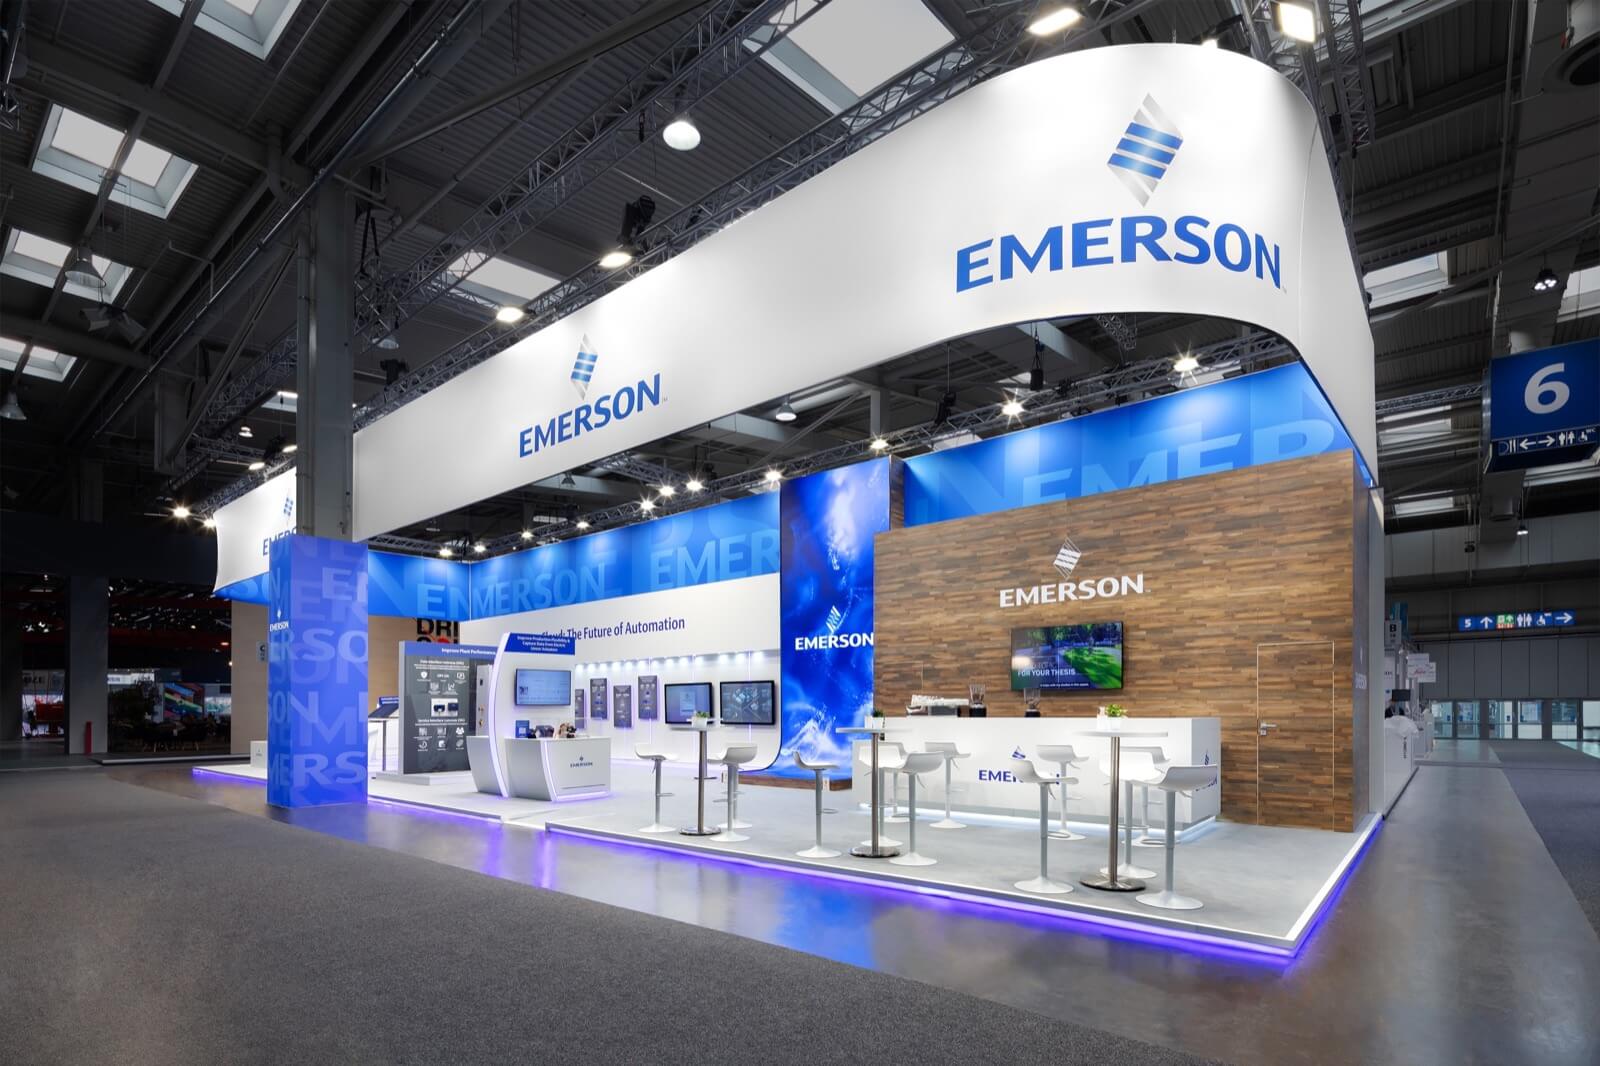 Emerson display booth at an event